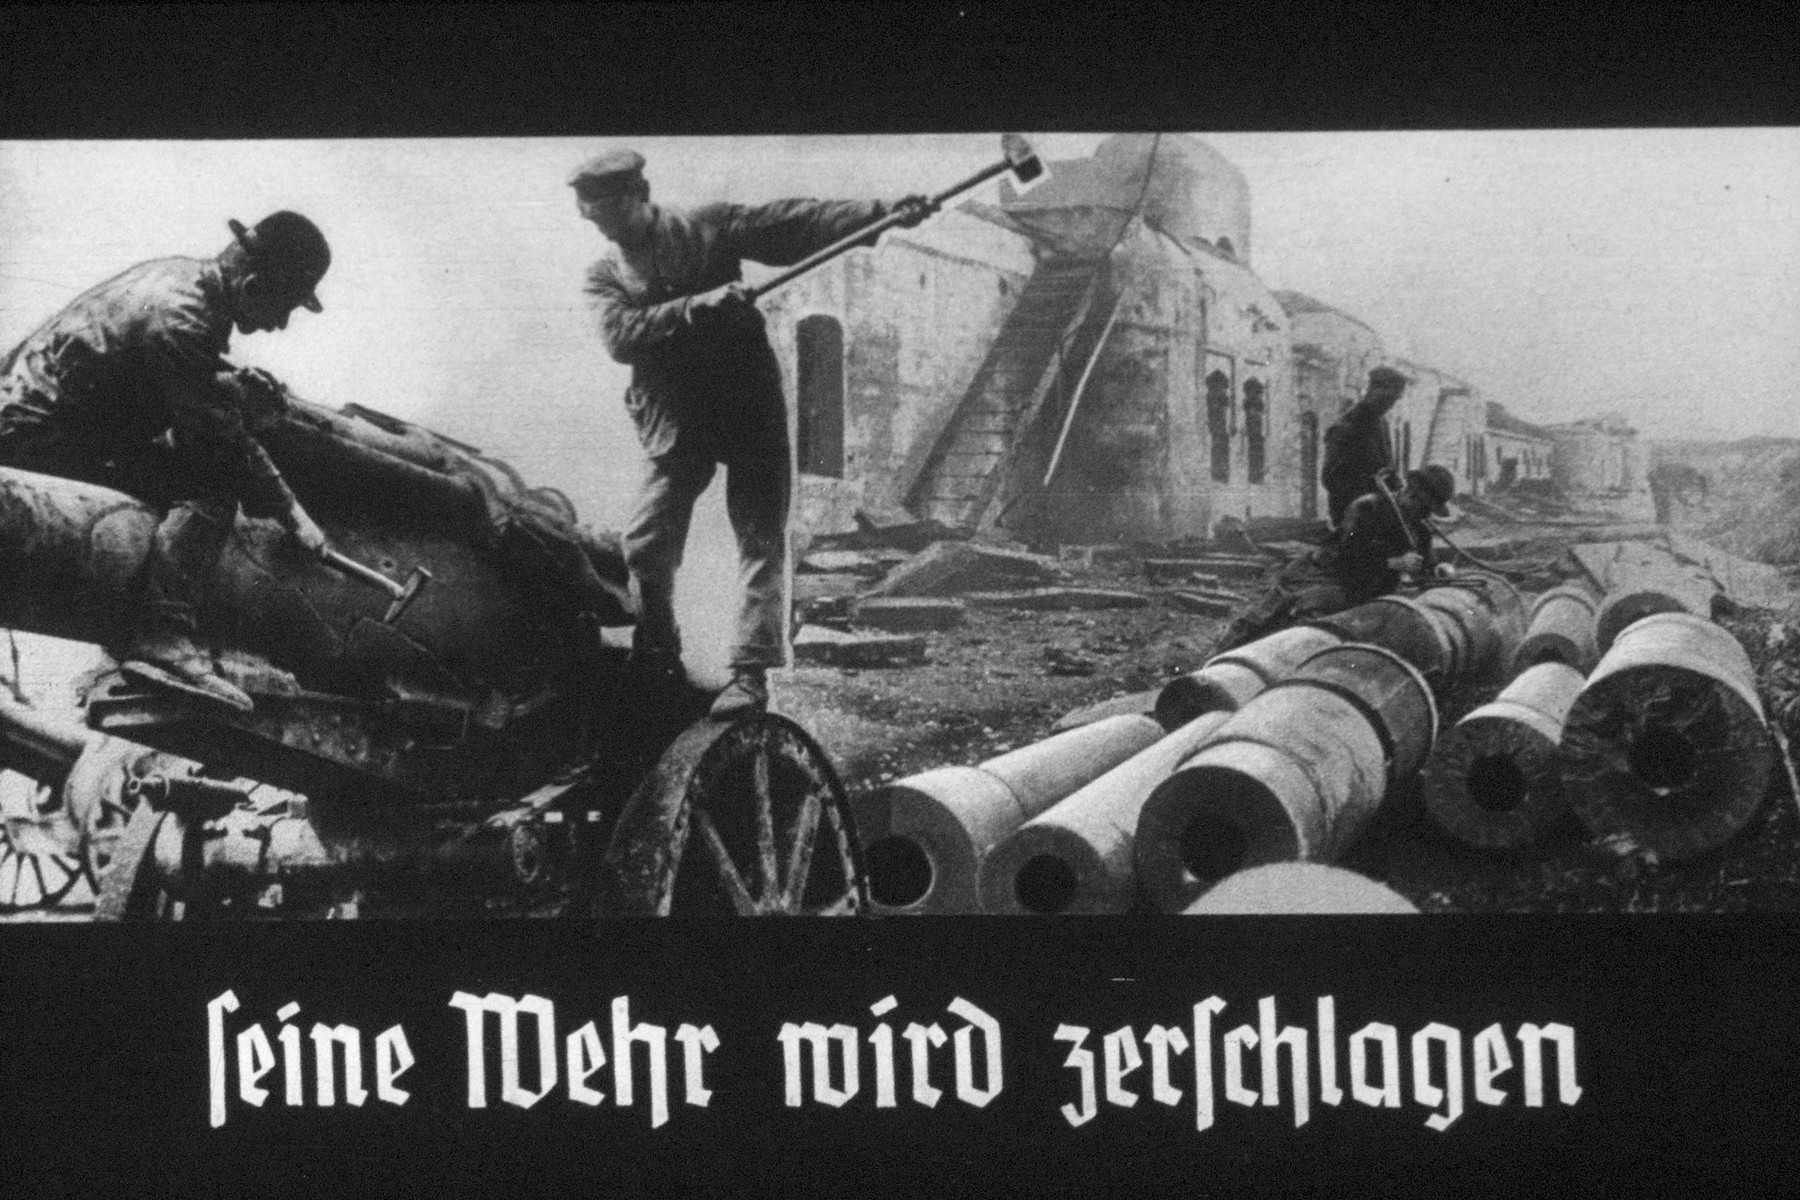 30th slide slide from a Hitler Youth slideshow about the aftermath of WWI, Versailles, how it was overcome and the rise of Nazism.

Seine Wehr wird zerschlagen
//
His defense is broken